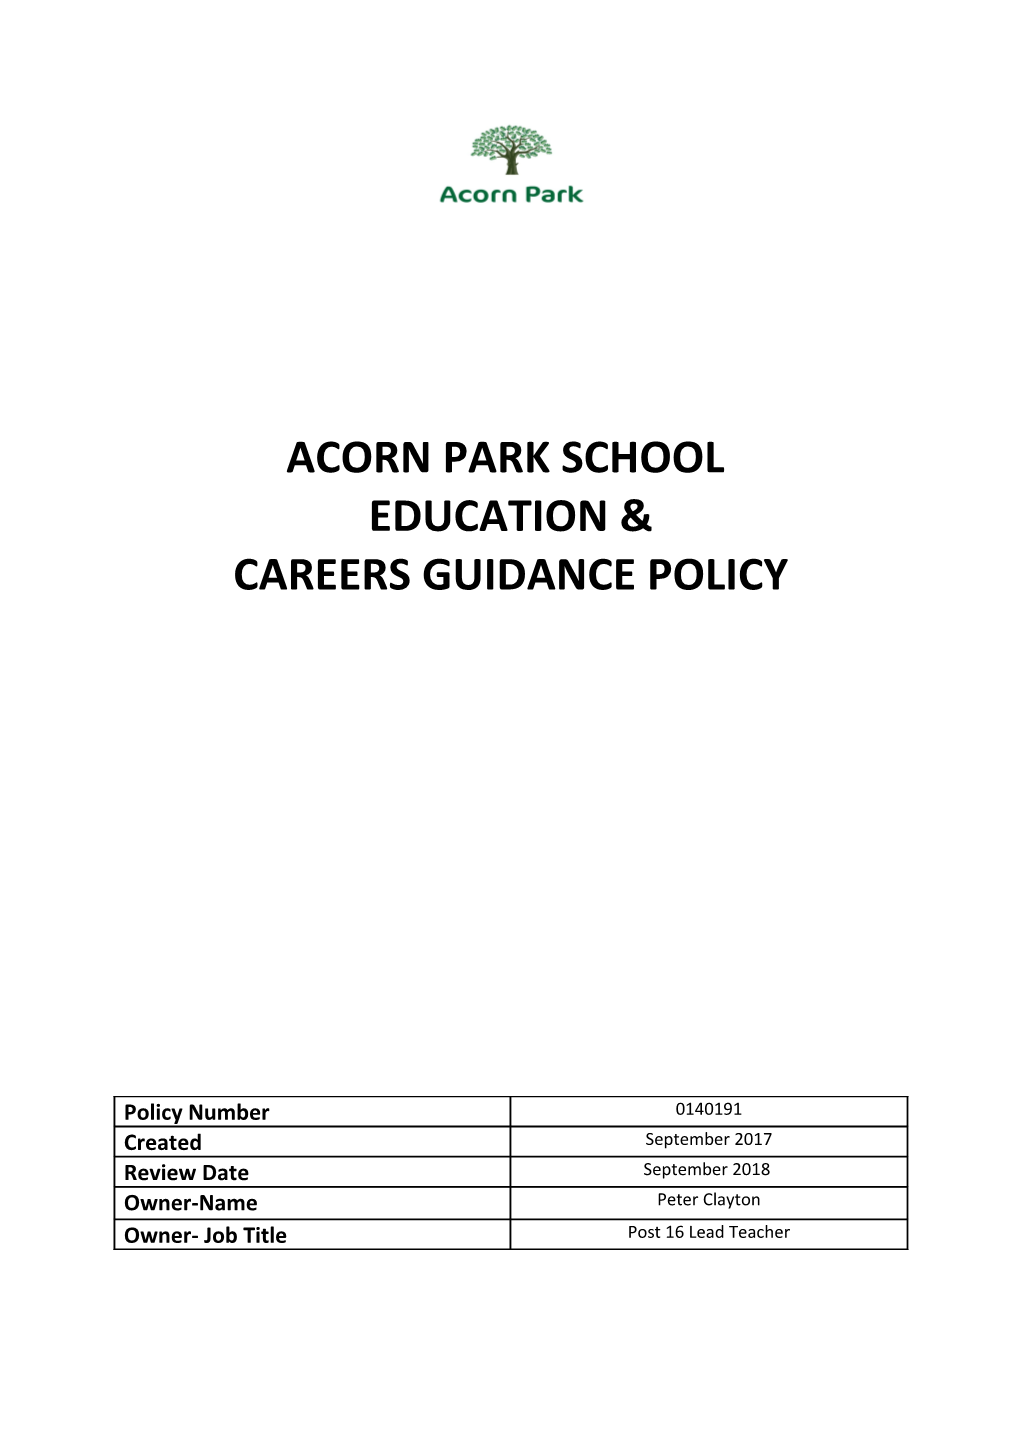 Rationale for Careers Education in Acorn Park School